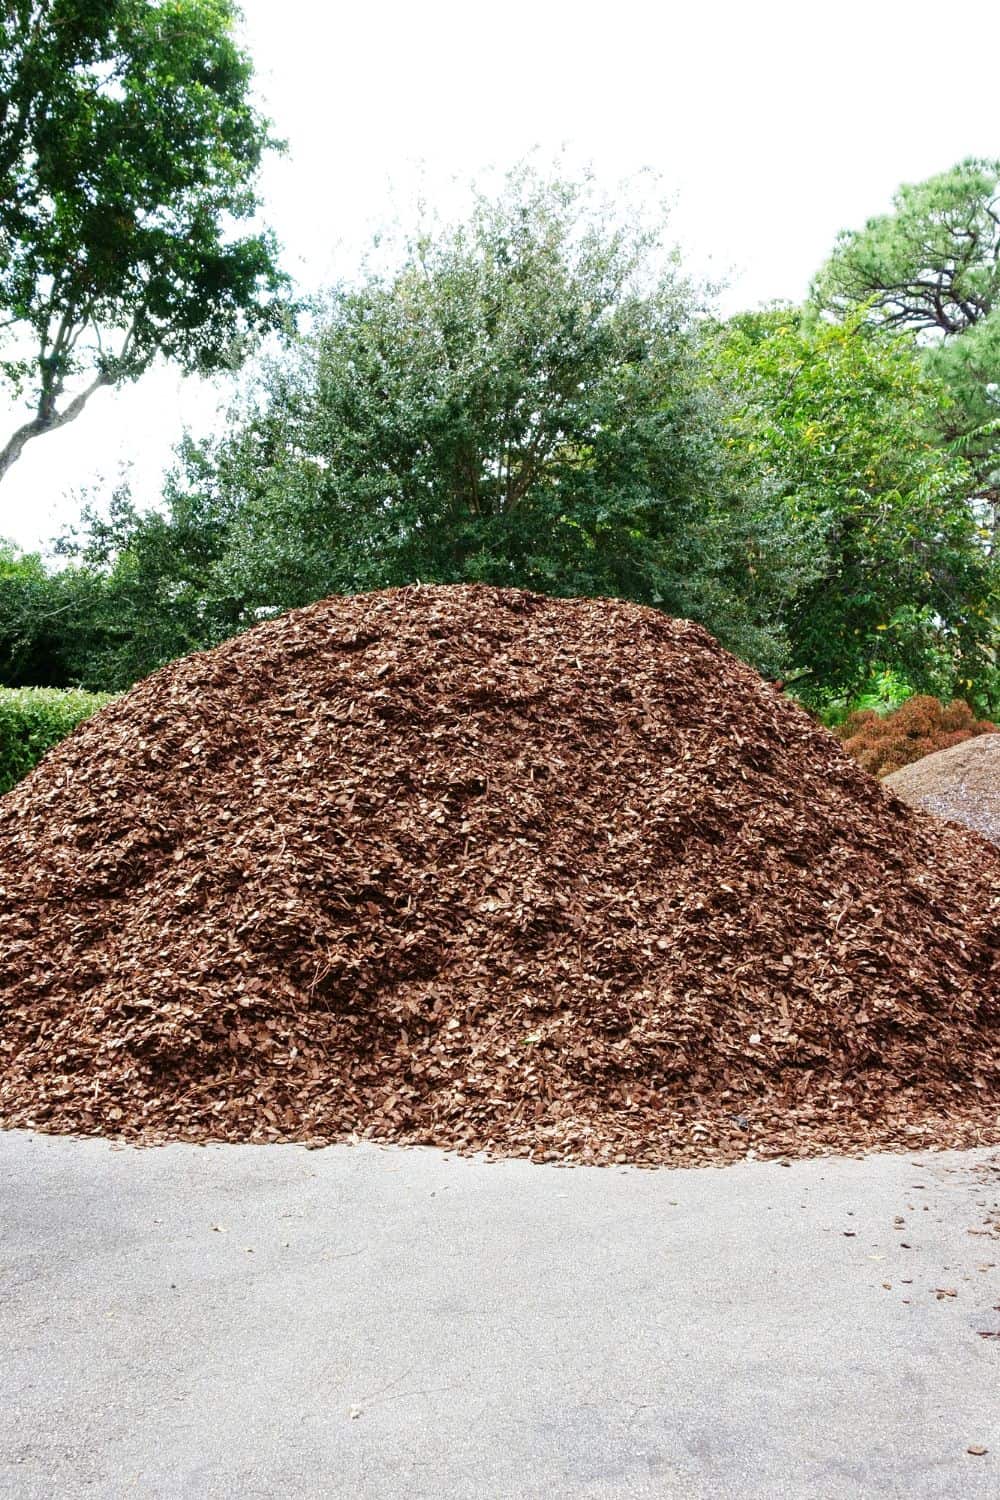 A pile of mulch in the driveway